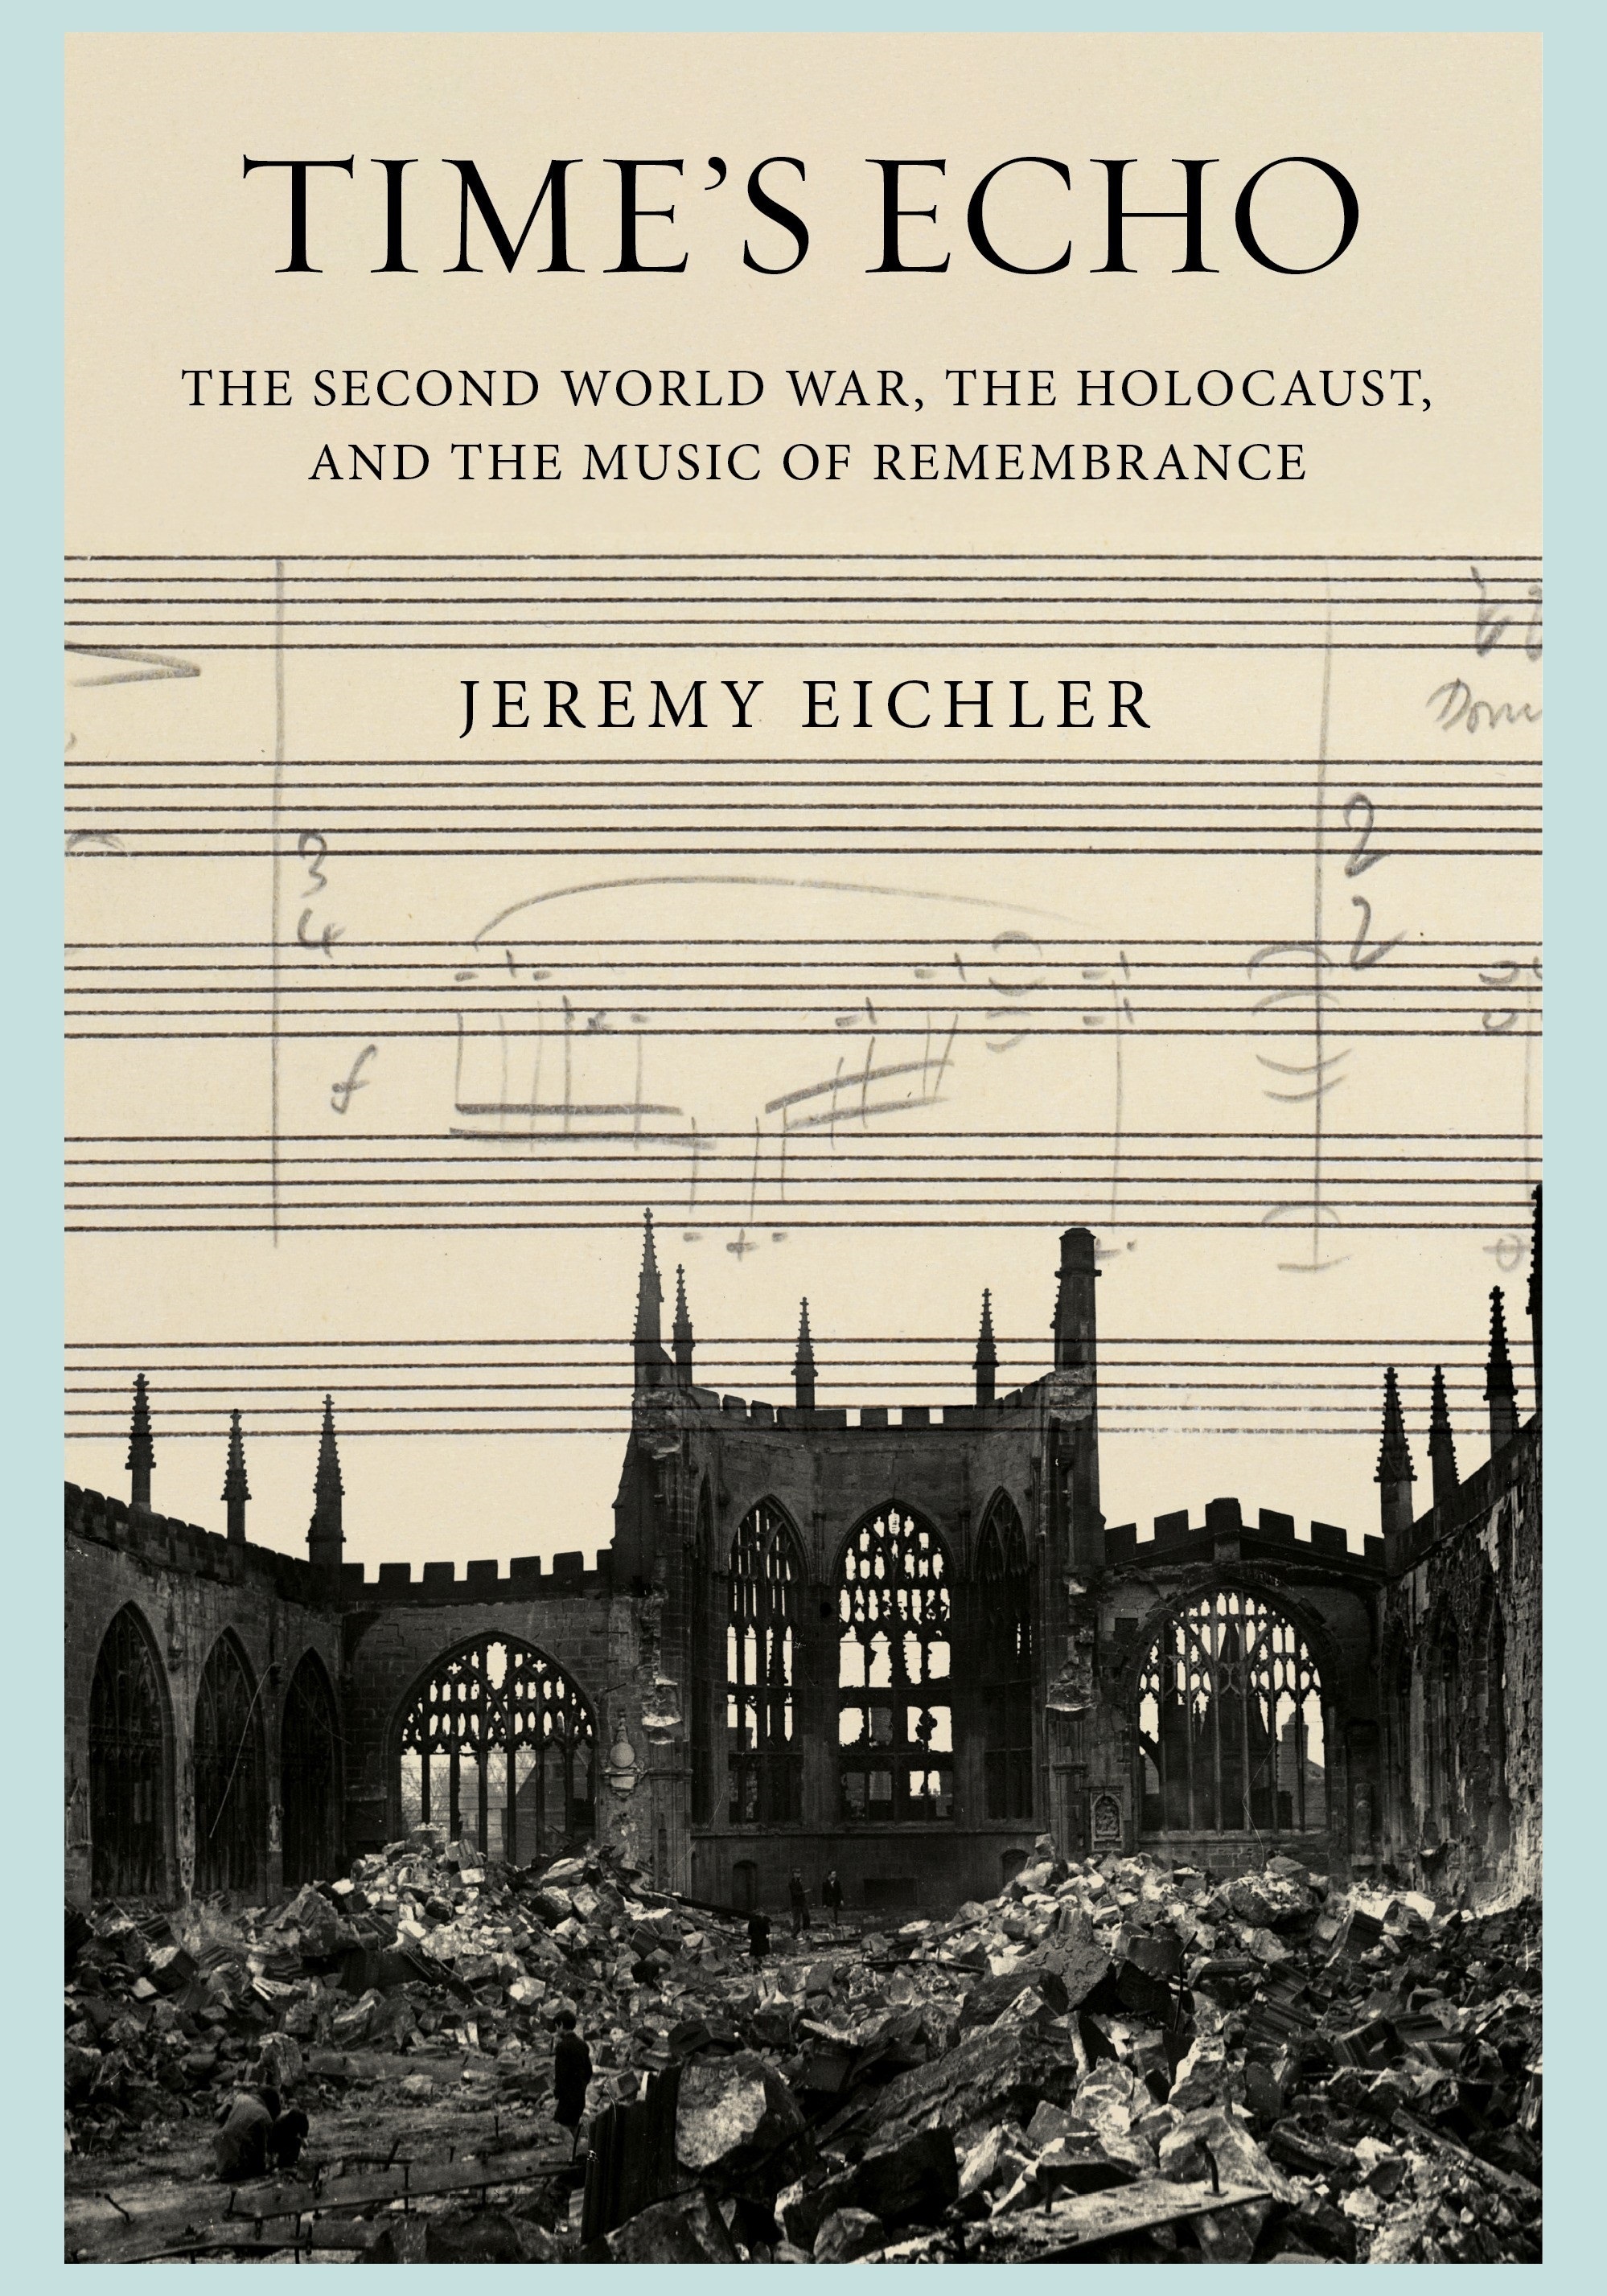 Times Echo: The Second World War, the Holocaust, and the Music of Remembrance by Jeremy Eichler